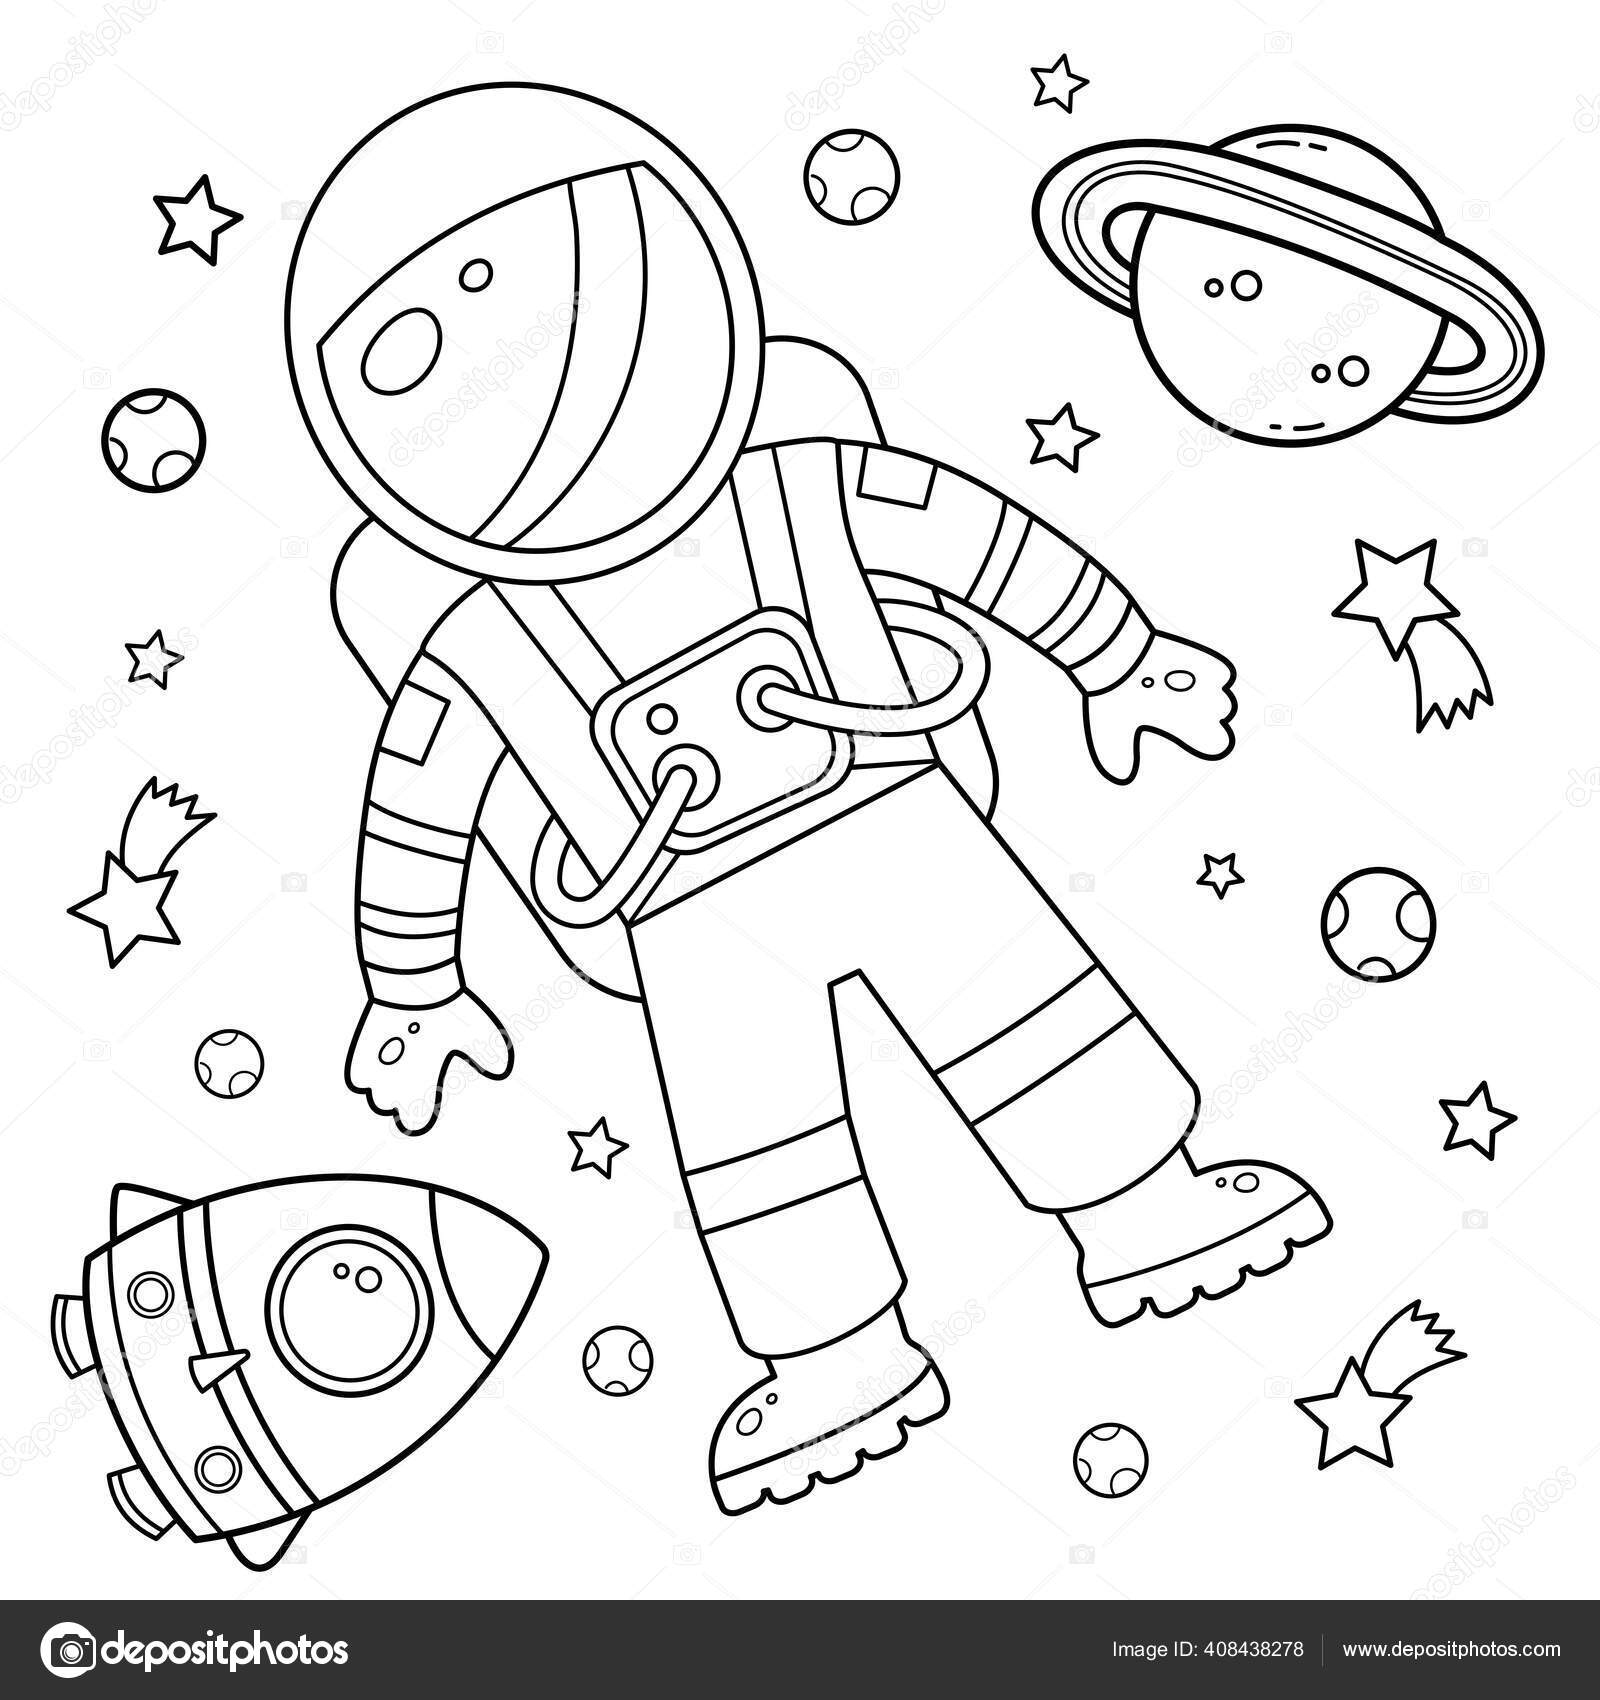 Coloring page outline cartoon rocket astronaut space coloring book kids stock vector by oleon